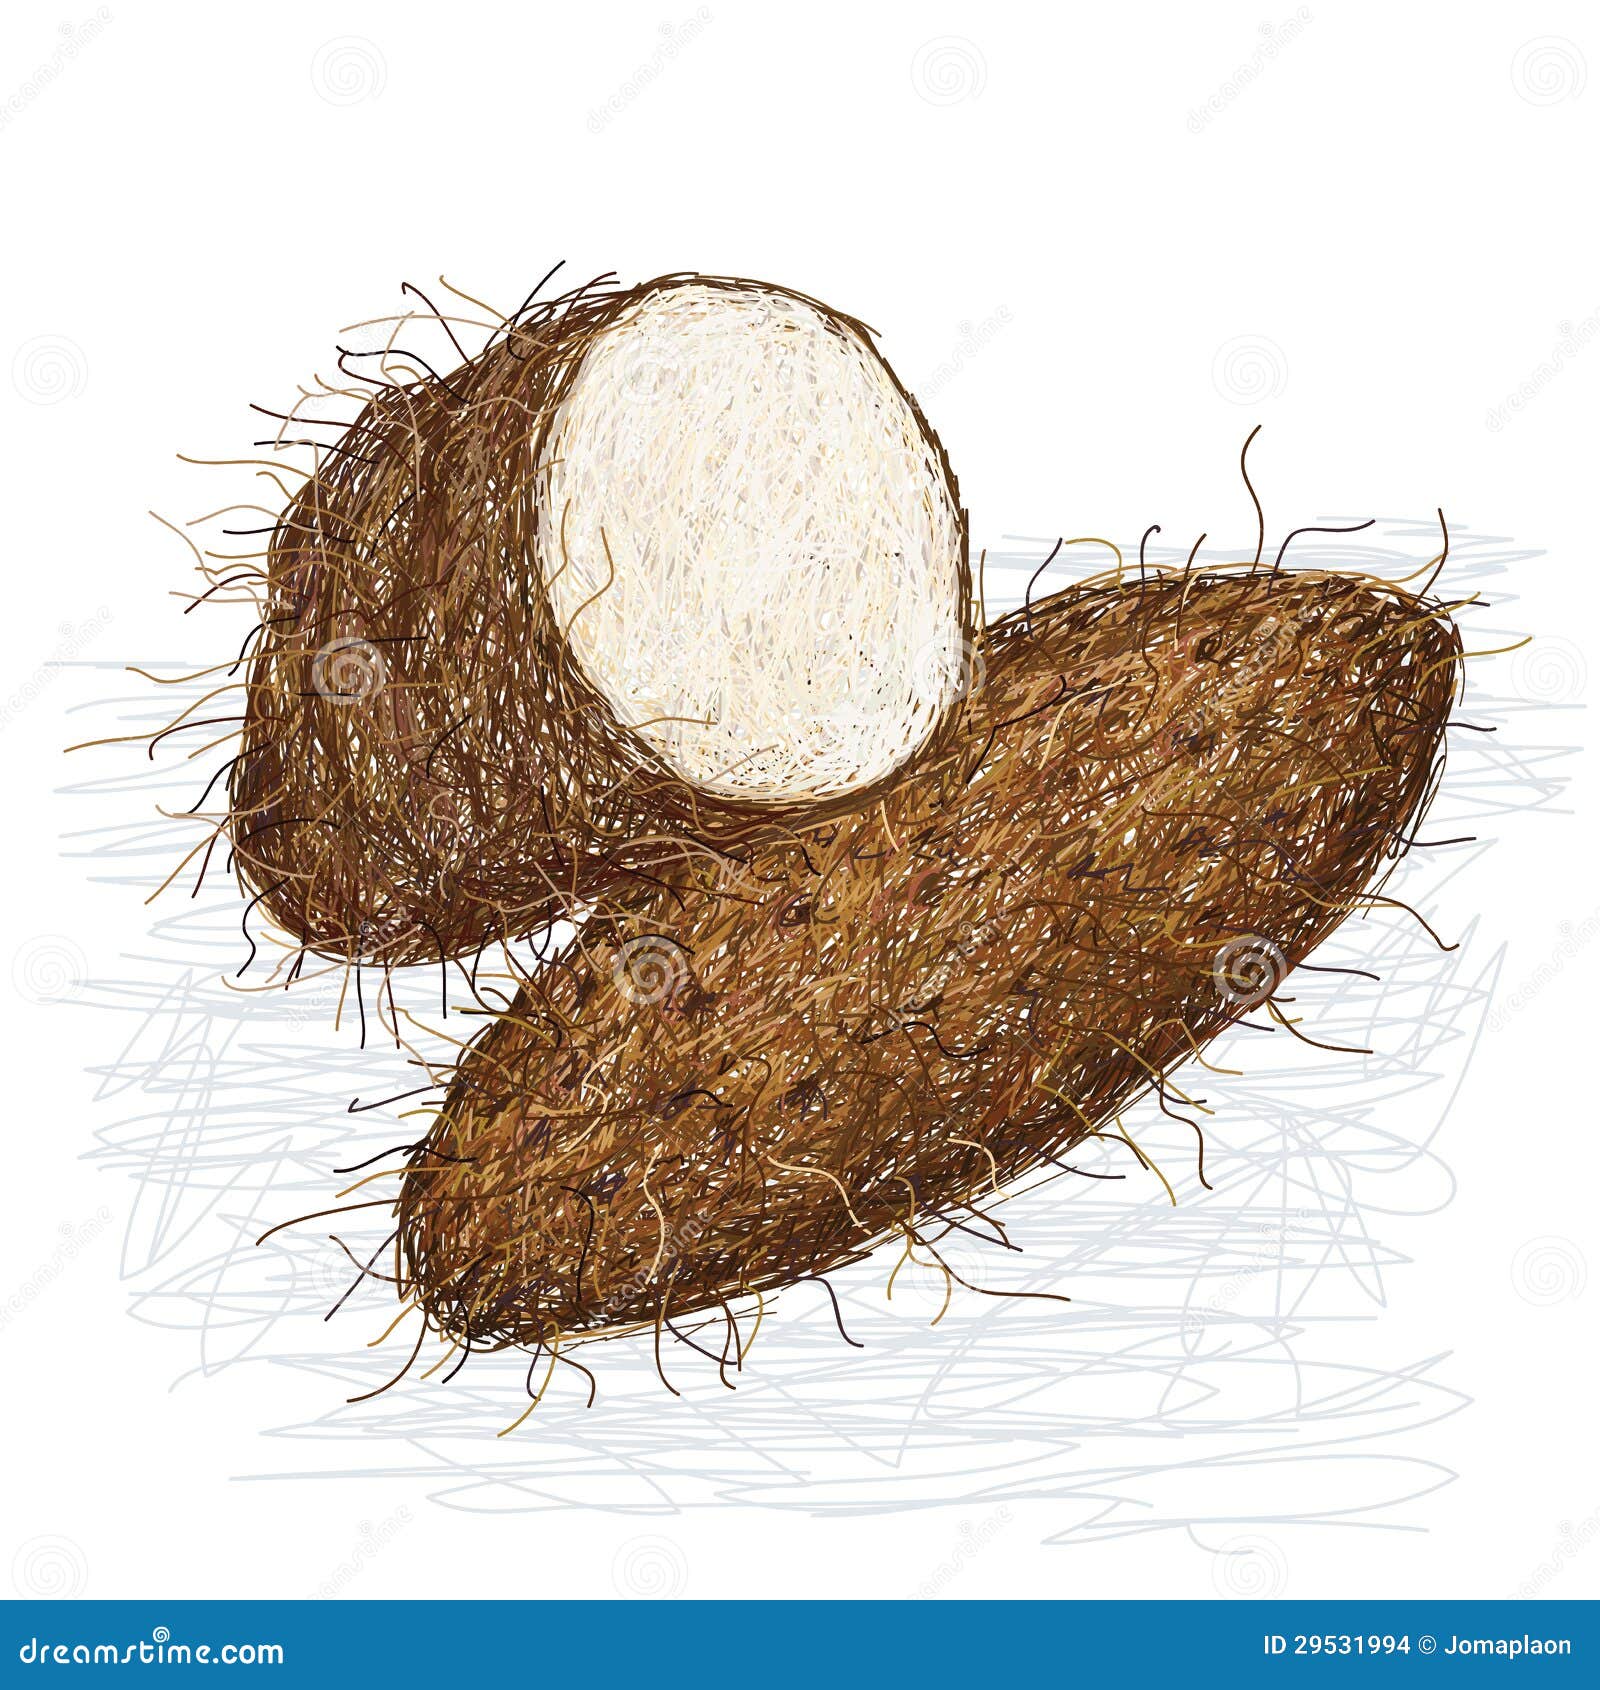 clipart of yam - photo #26